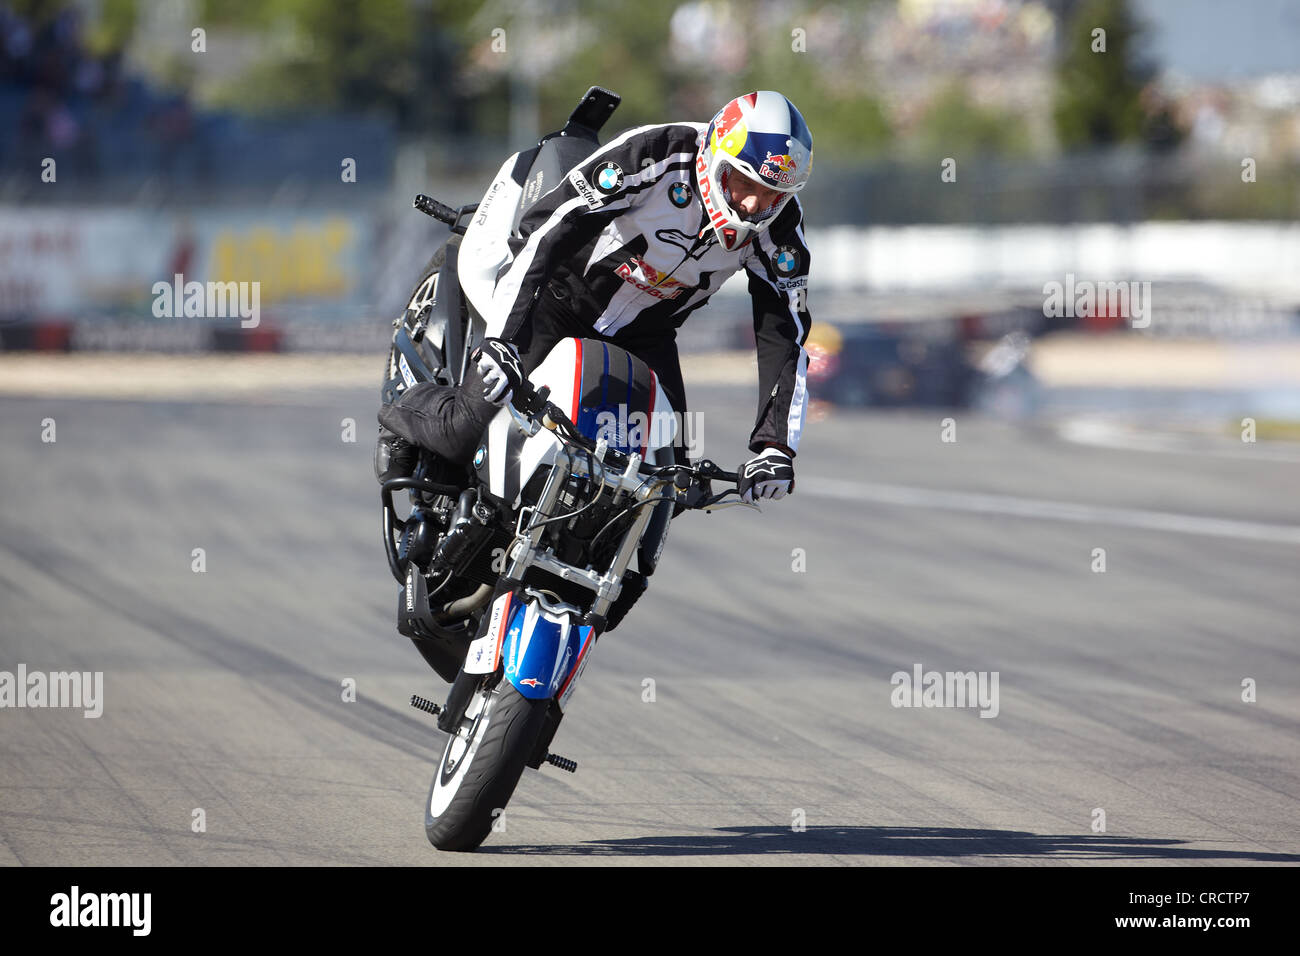 Motorcyclist performing 'stoppy' at a motorcycle stunt show, Nuerburgring race track, Rhineland-Palatinate, Germany, Europe Stock Photo